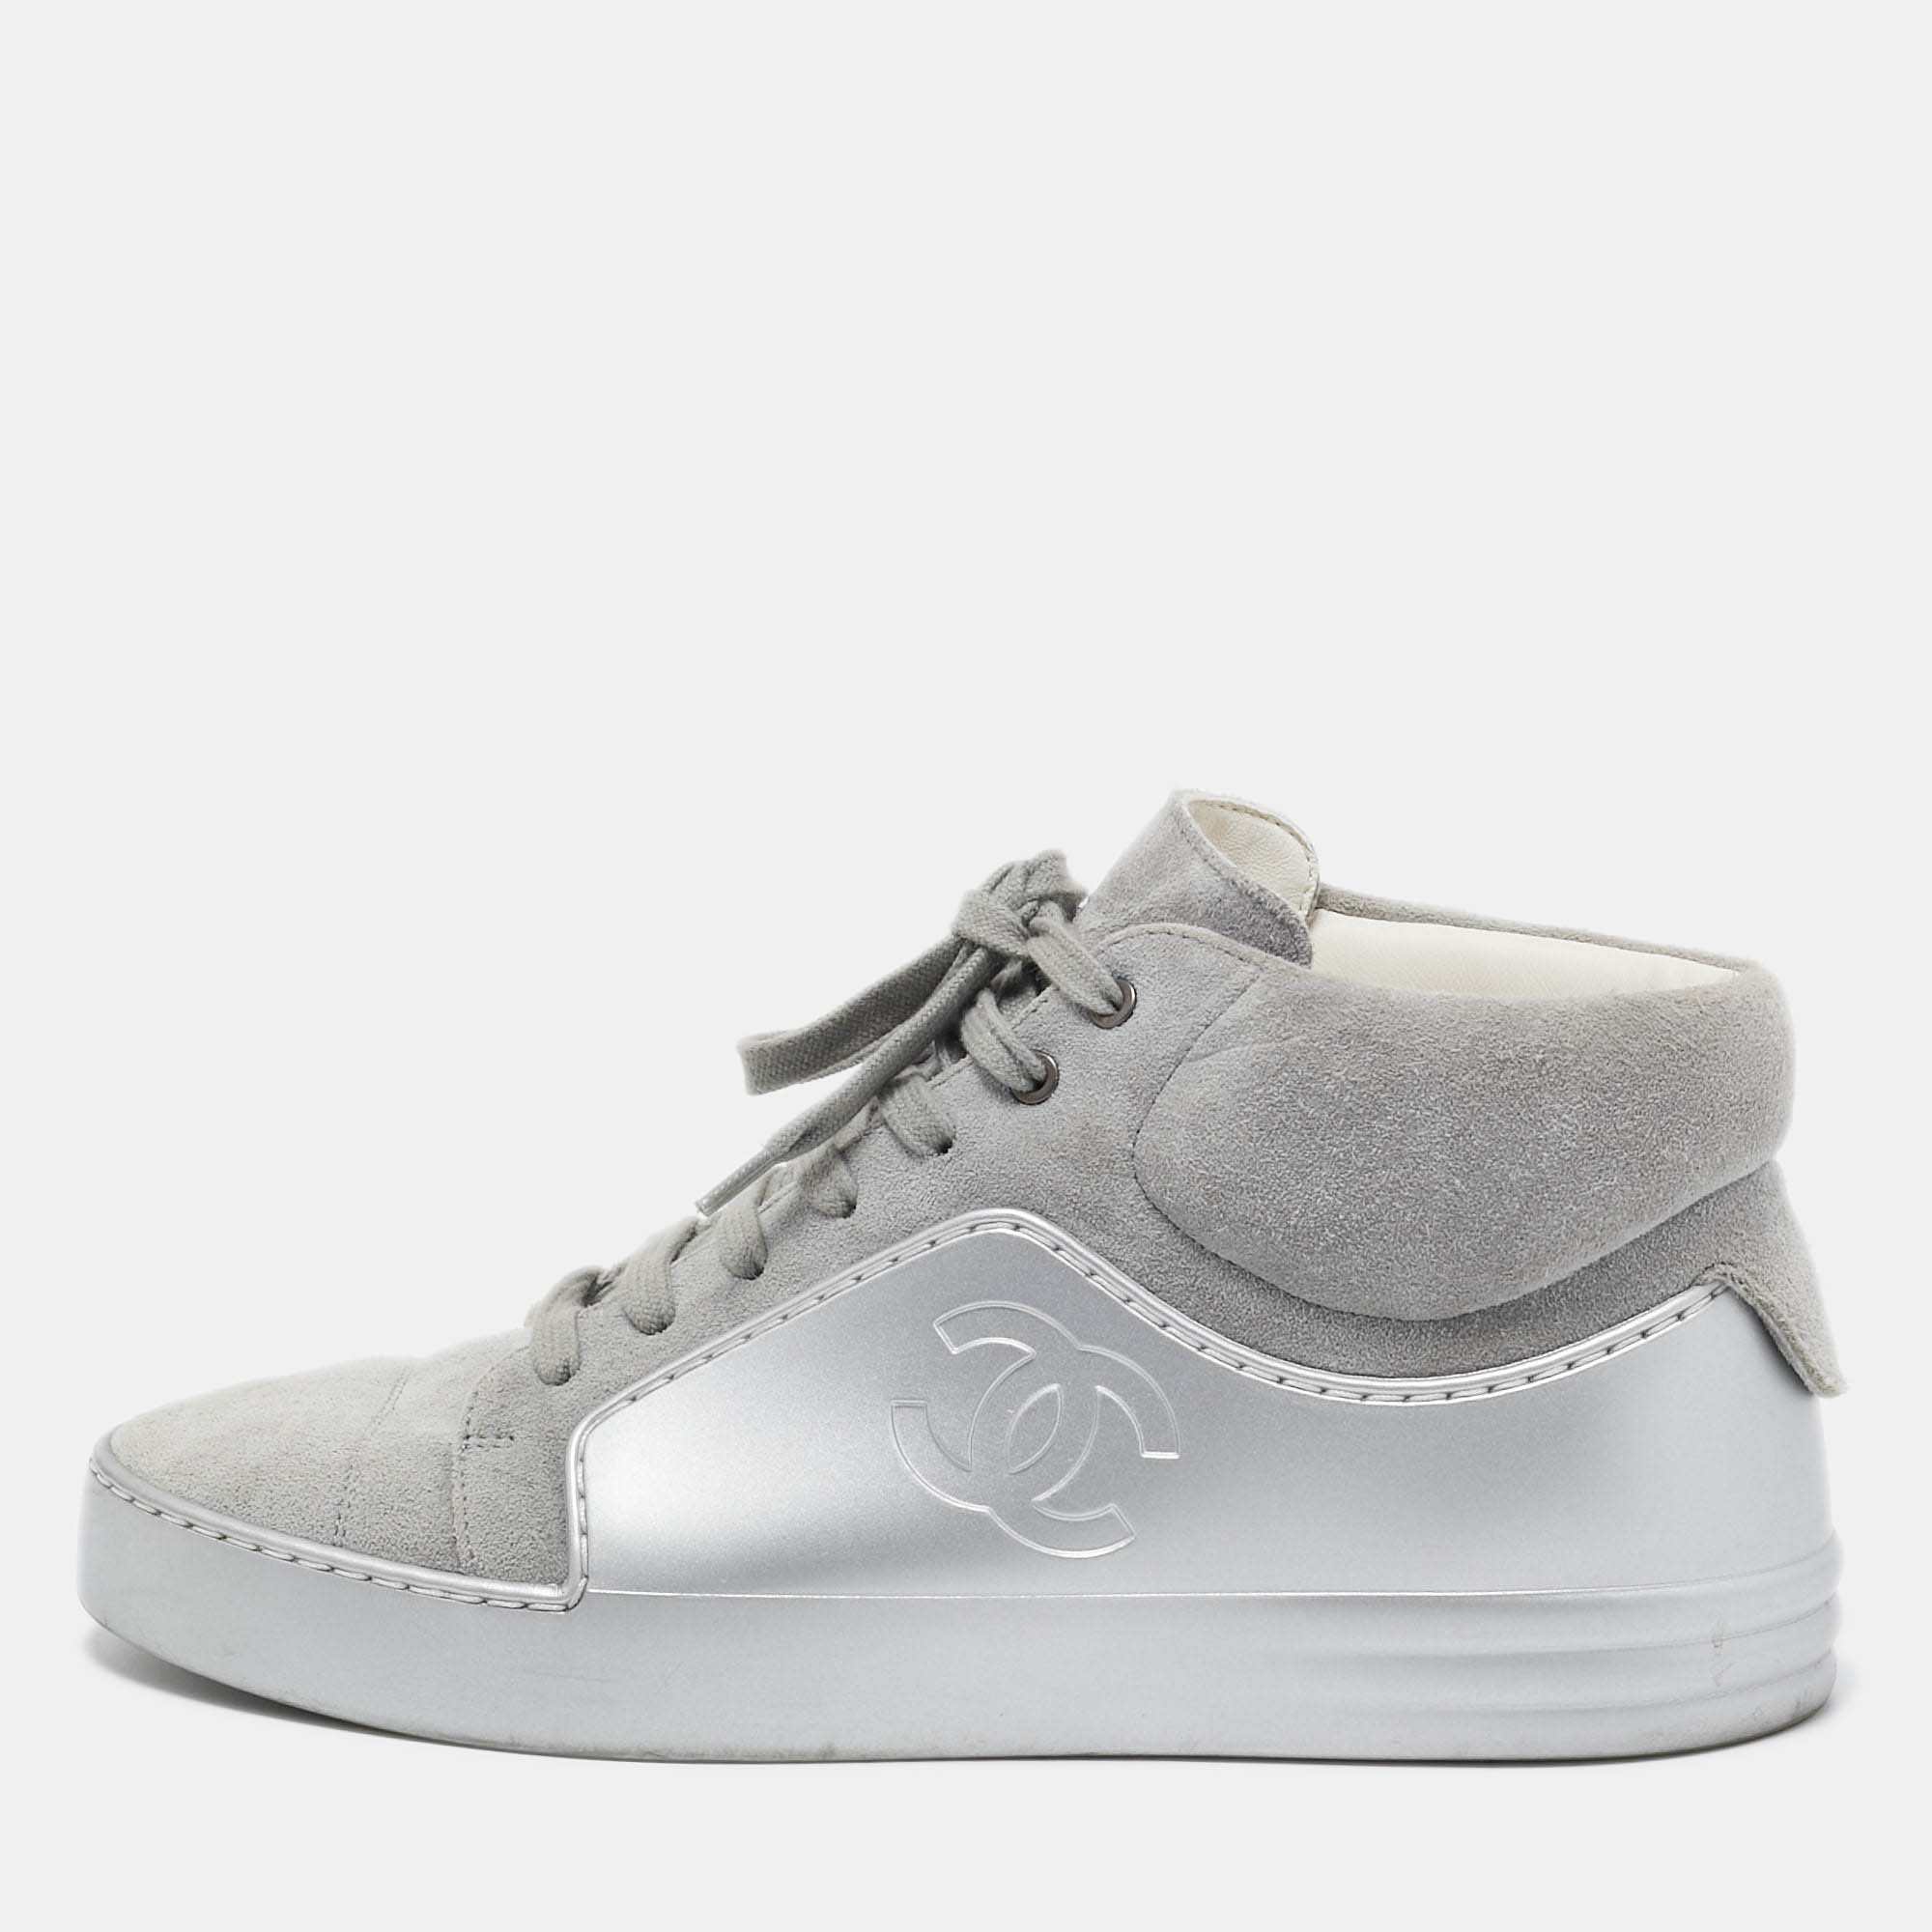 Pre-owned Chanel Grey Suede And Rubber Cc High Top Sneakers Size